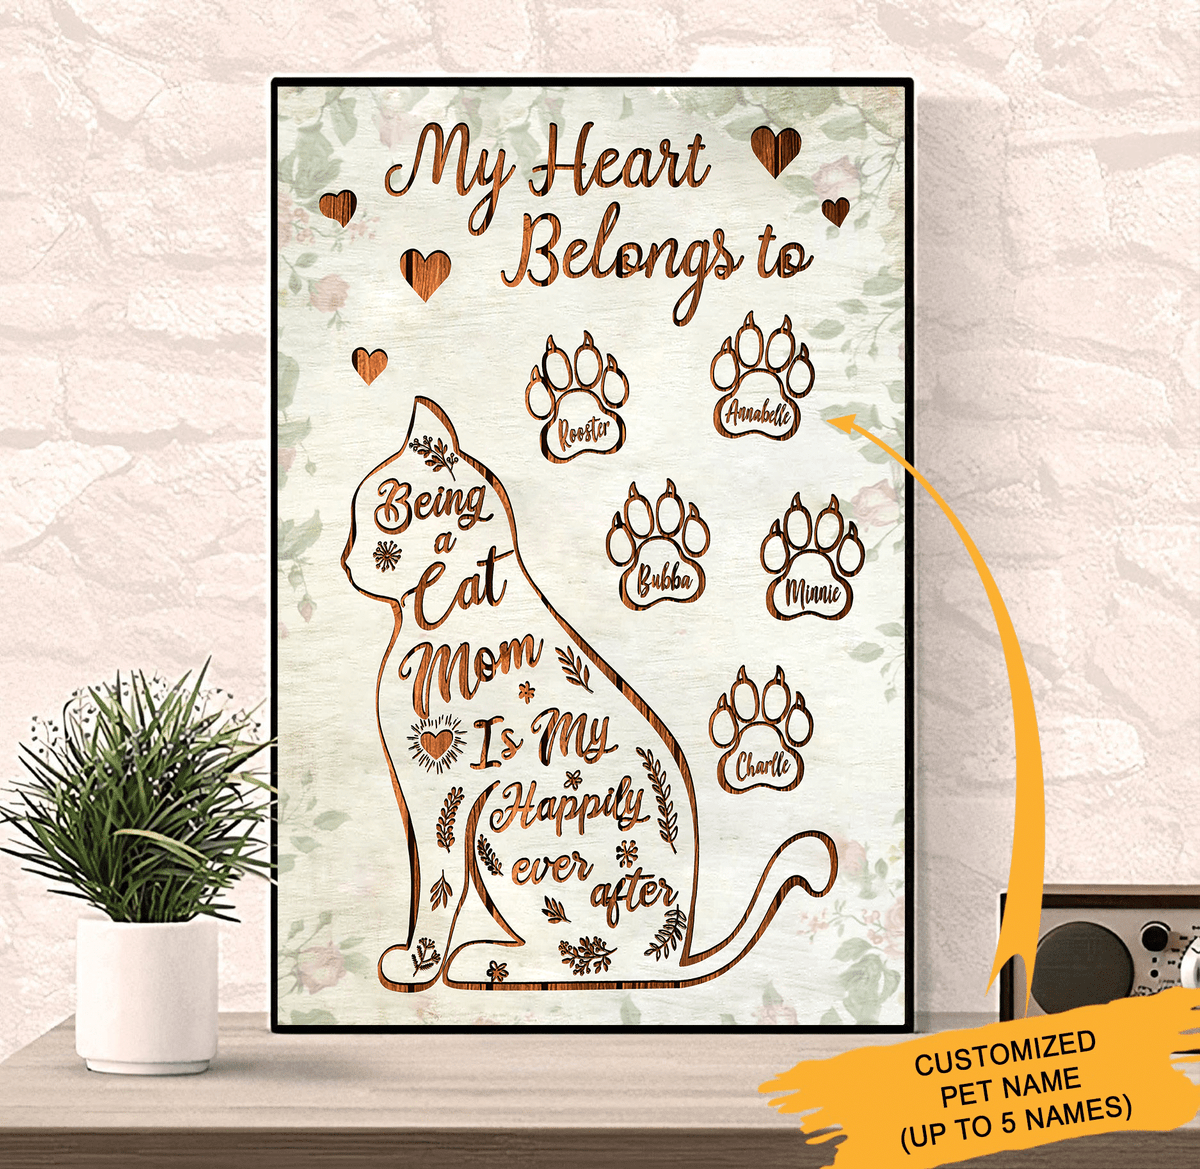 My Heart Belongs To Cats Canvas Painting Art Personalized Gift Idea Framed Prints, Canvas Paintings Wrapped Canvas 8x10